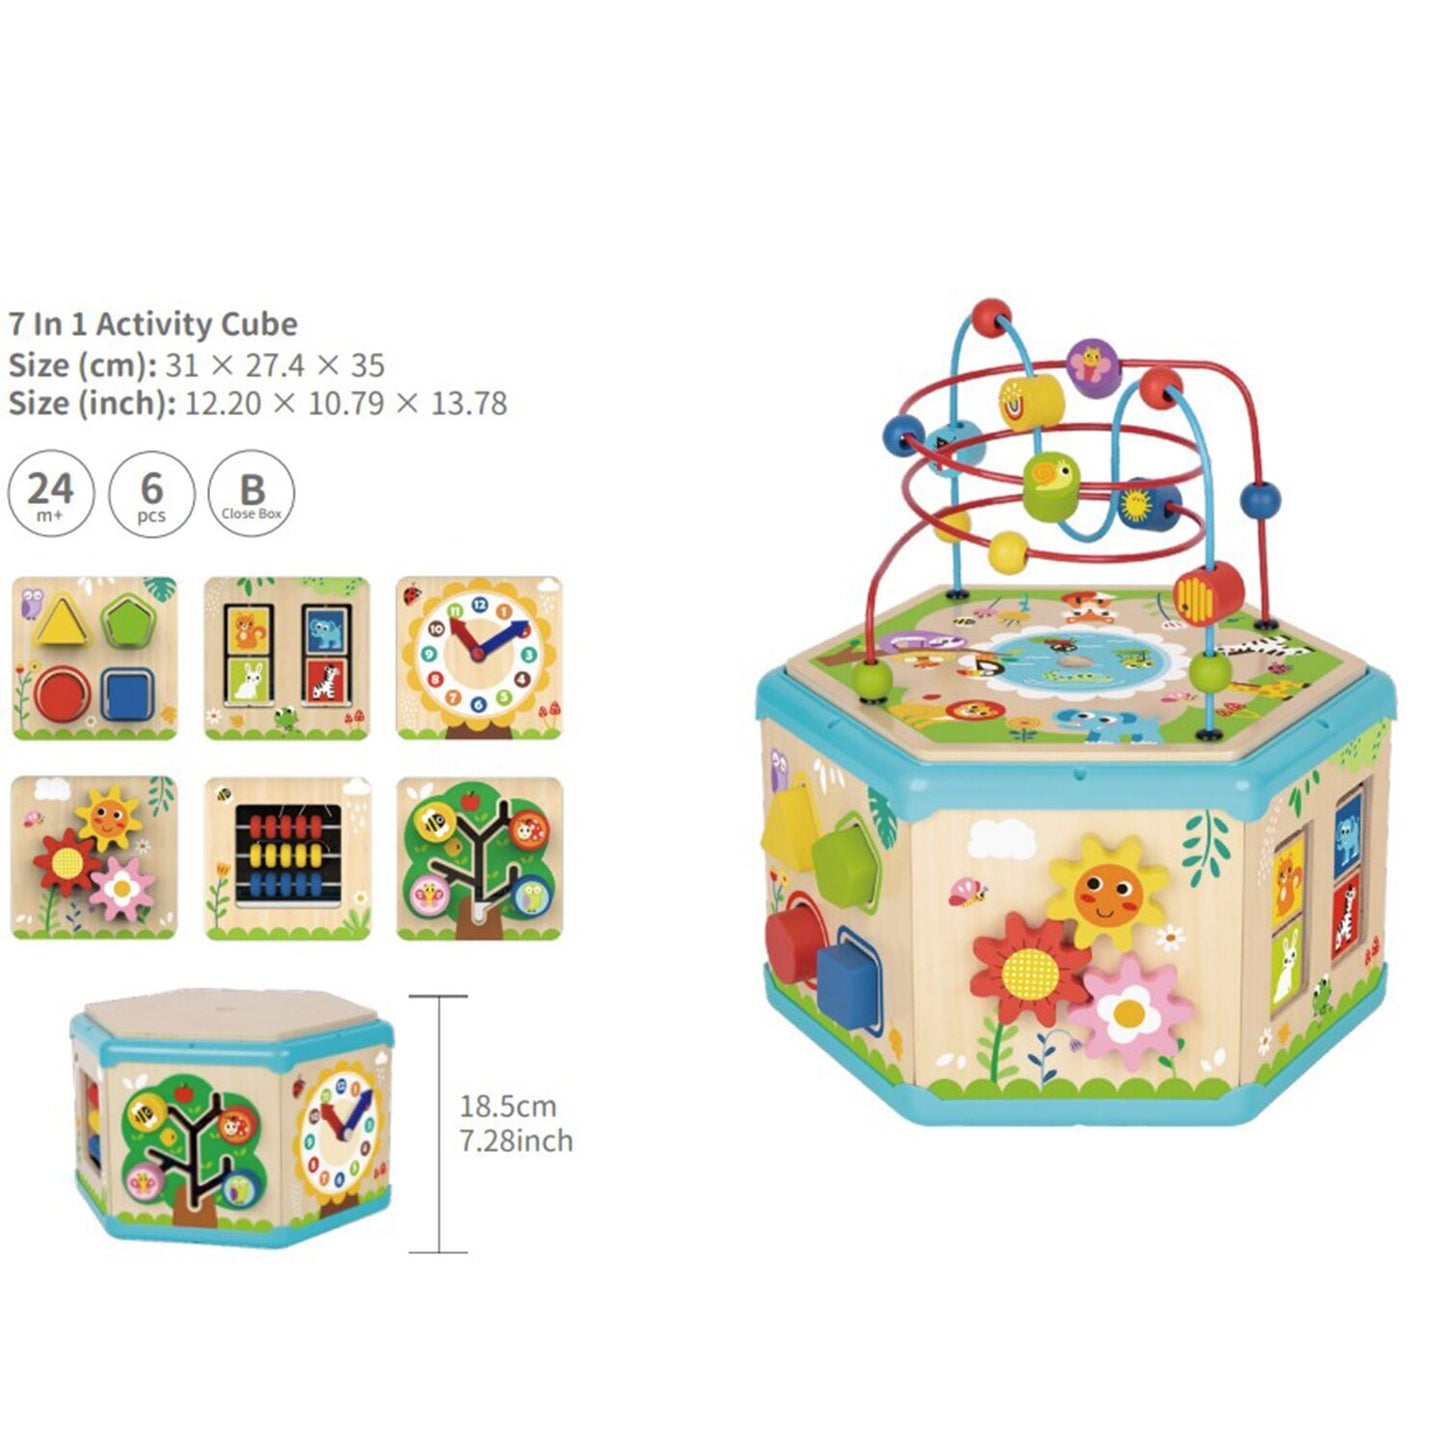 Tooky Toy Wooden 7-in-1 Activity Cube Play Station